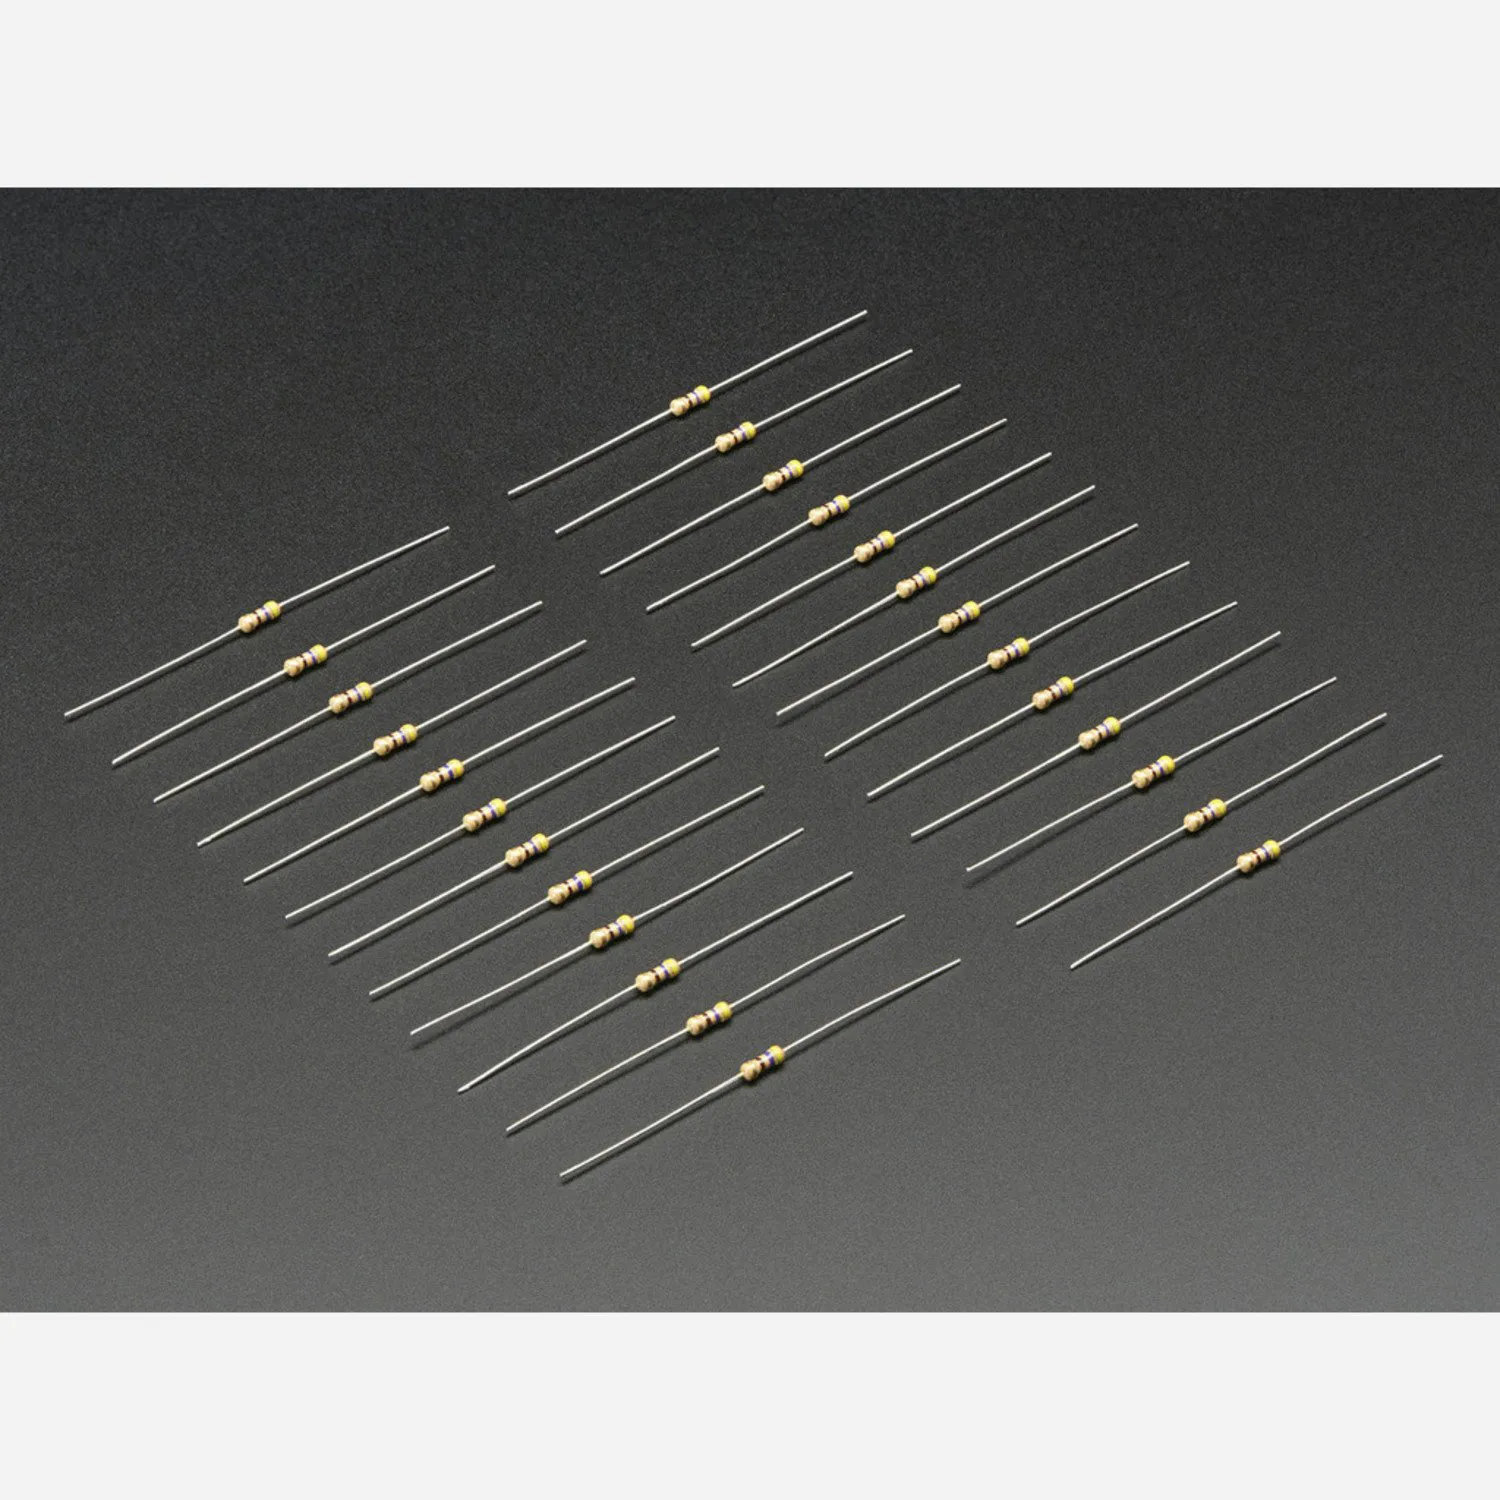 Photo of Through-Hole Resistors - 470 ohm 5% 1/4W - Pack of 25